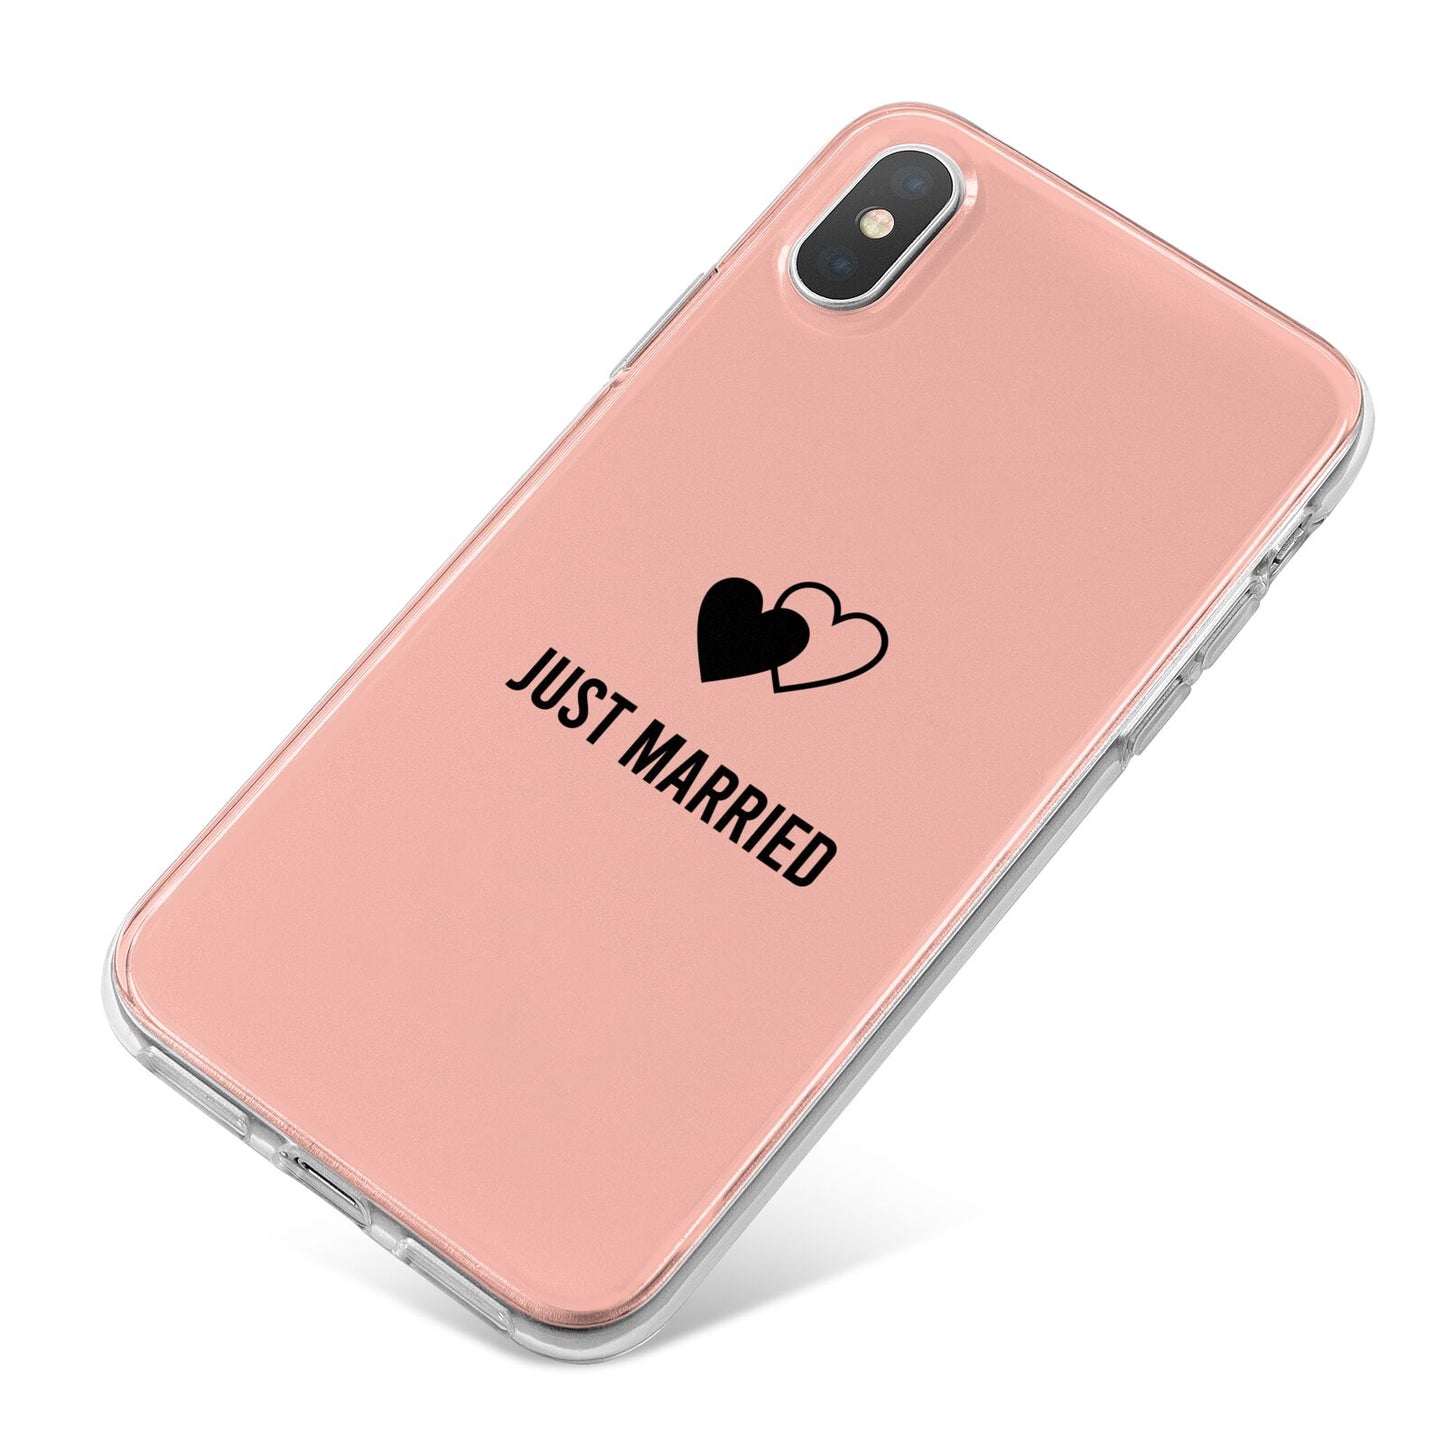 Just Married iPhone X Bumper Case on Silver iPhone